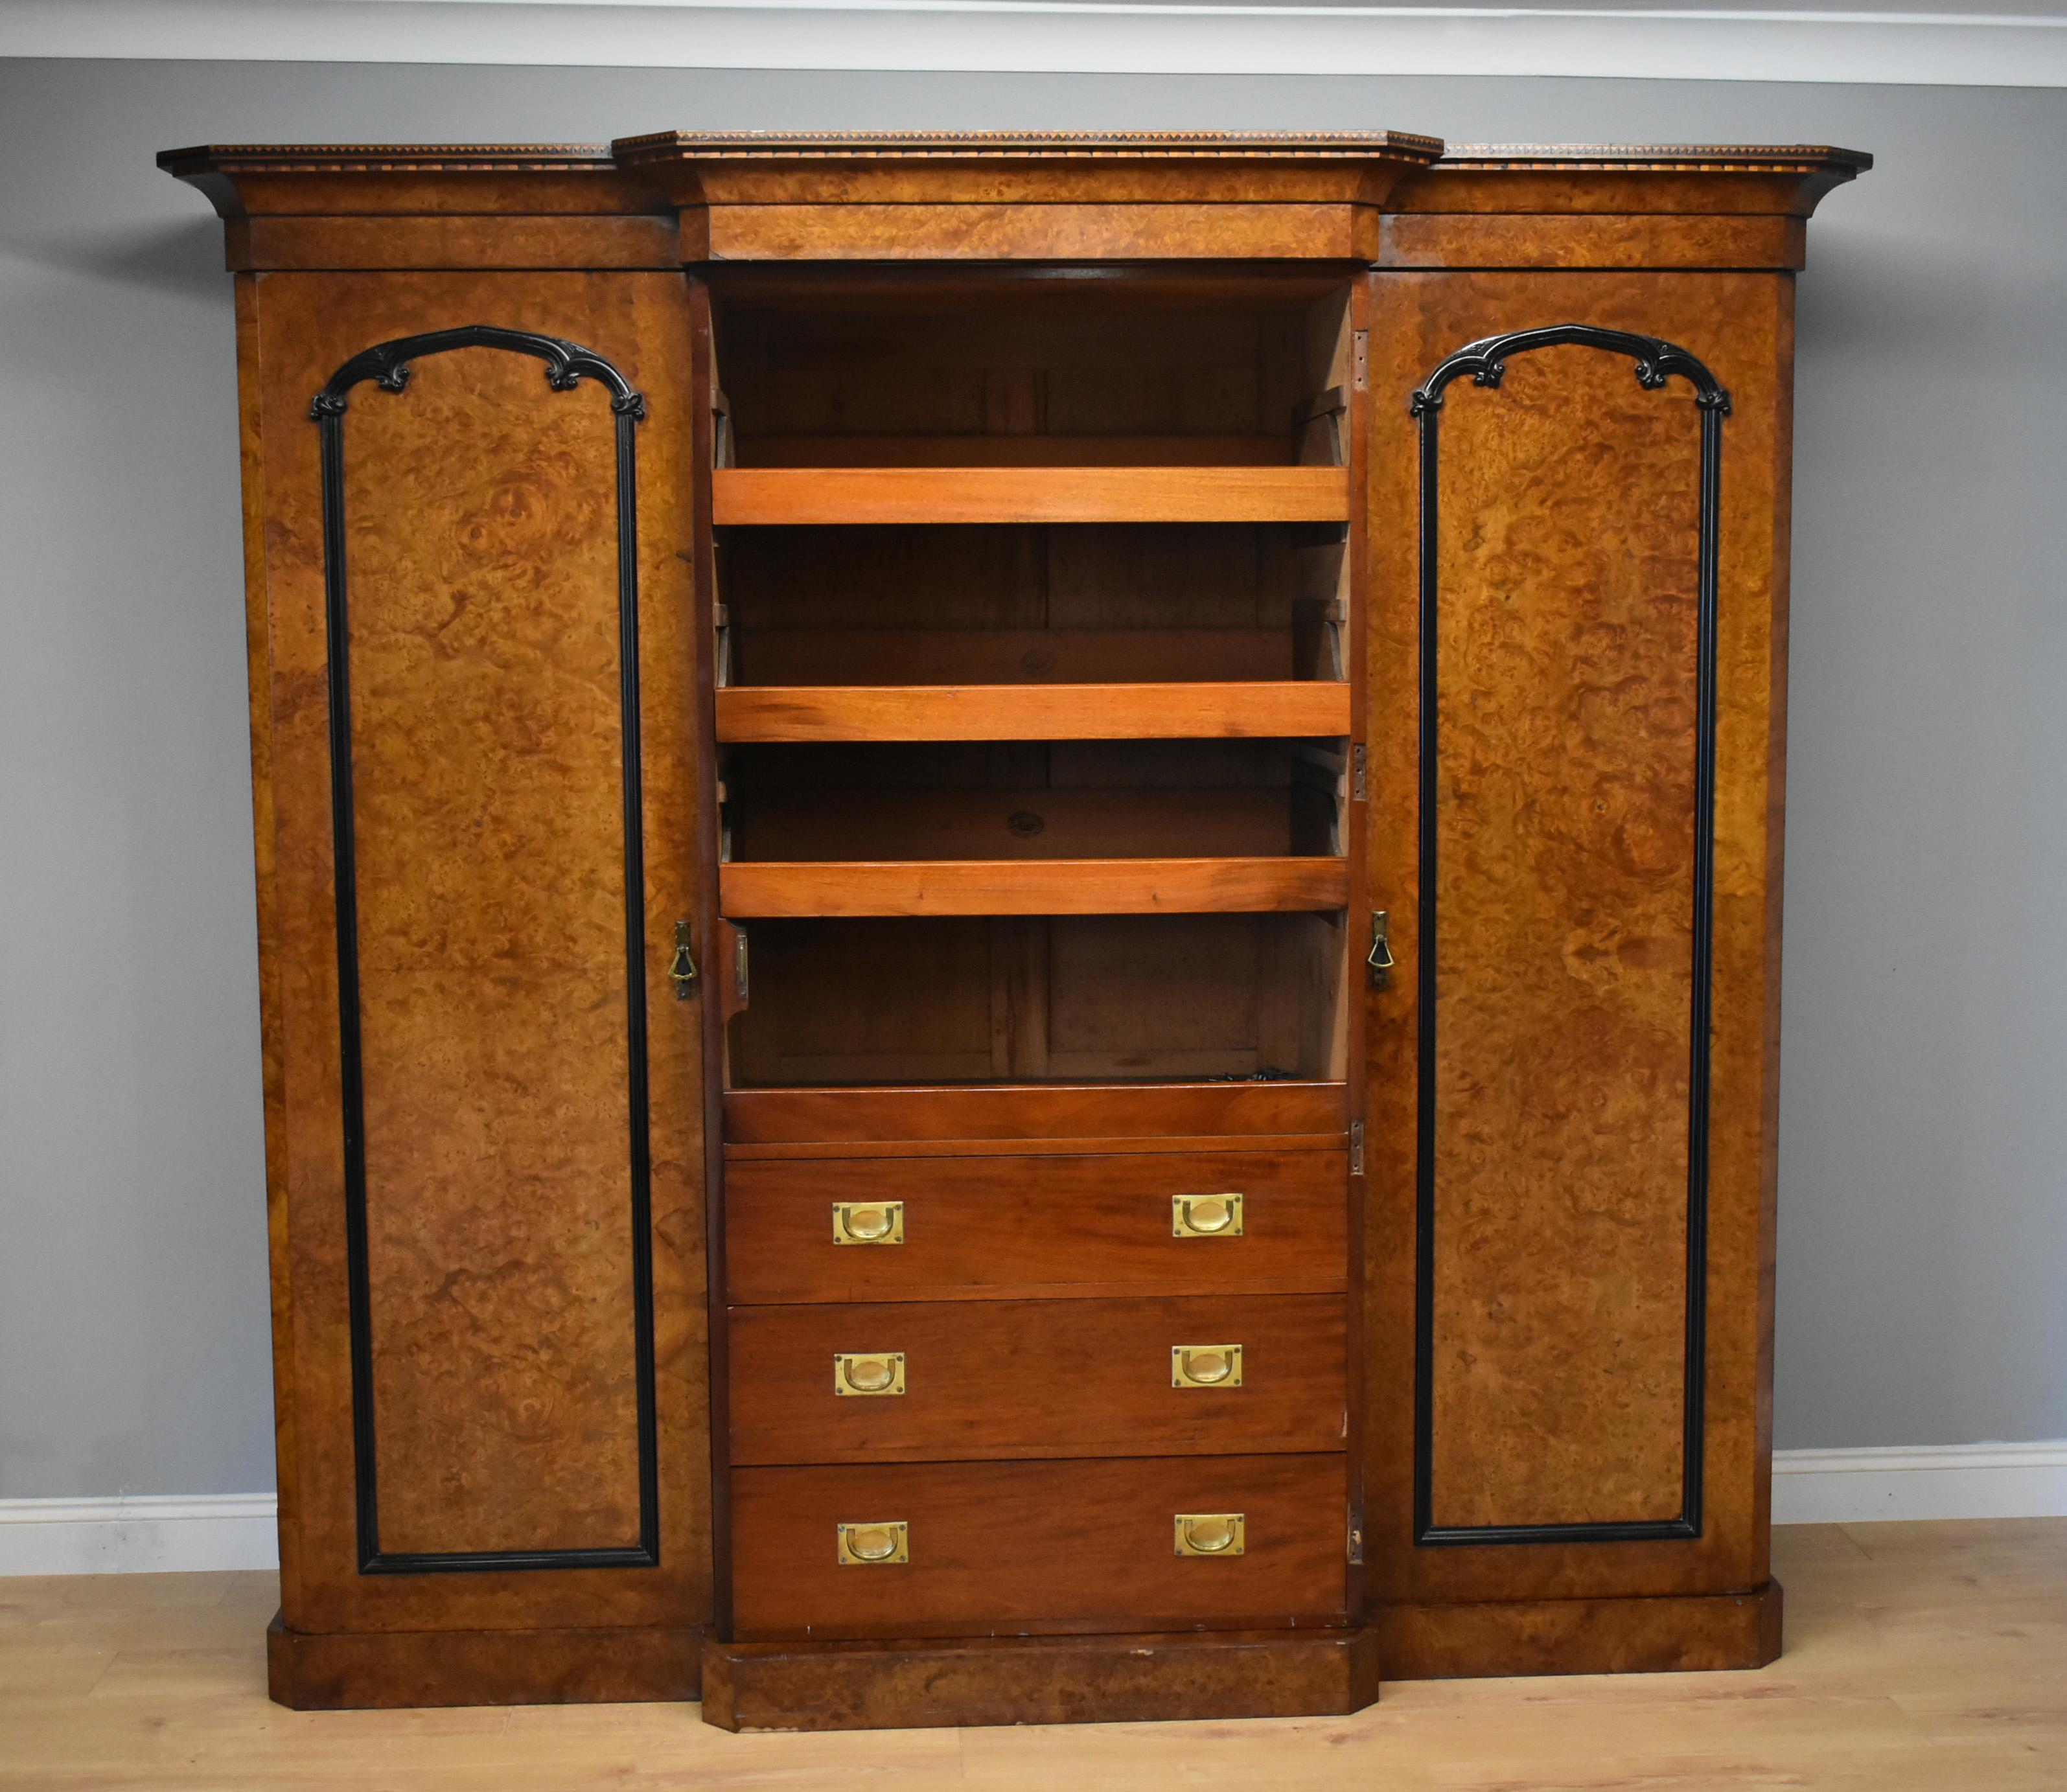 For sale is a good quality Victorian burr walnut breakfront wardrobe by R. Crosby & Sons of Liverpool, Established in 1827. The wardrobe has a stepped cornice above three doors, the centre of which having a full length mirror, opening to reveal a